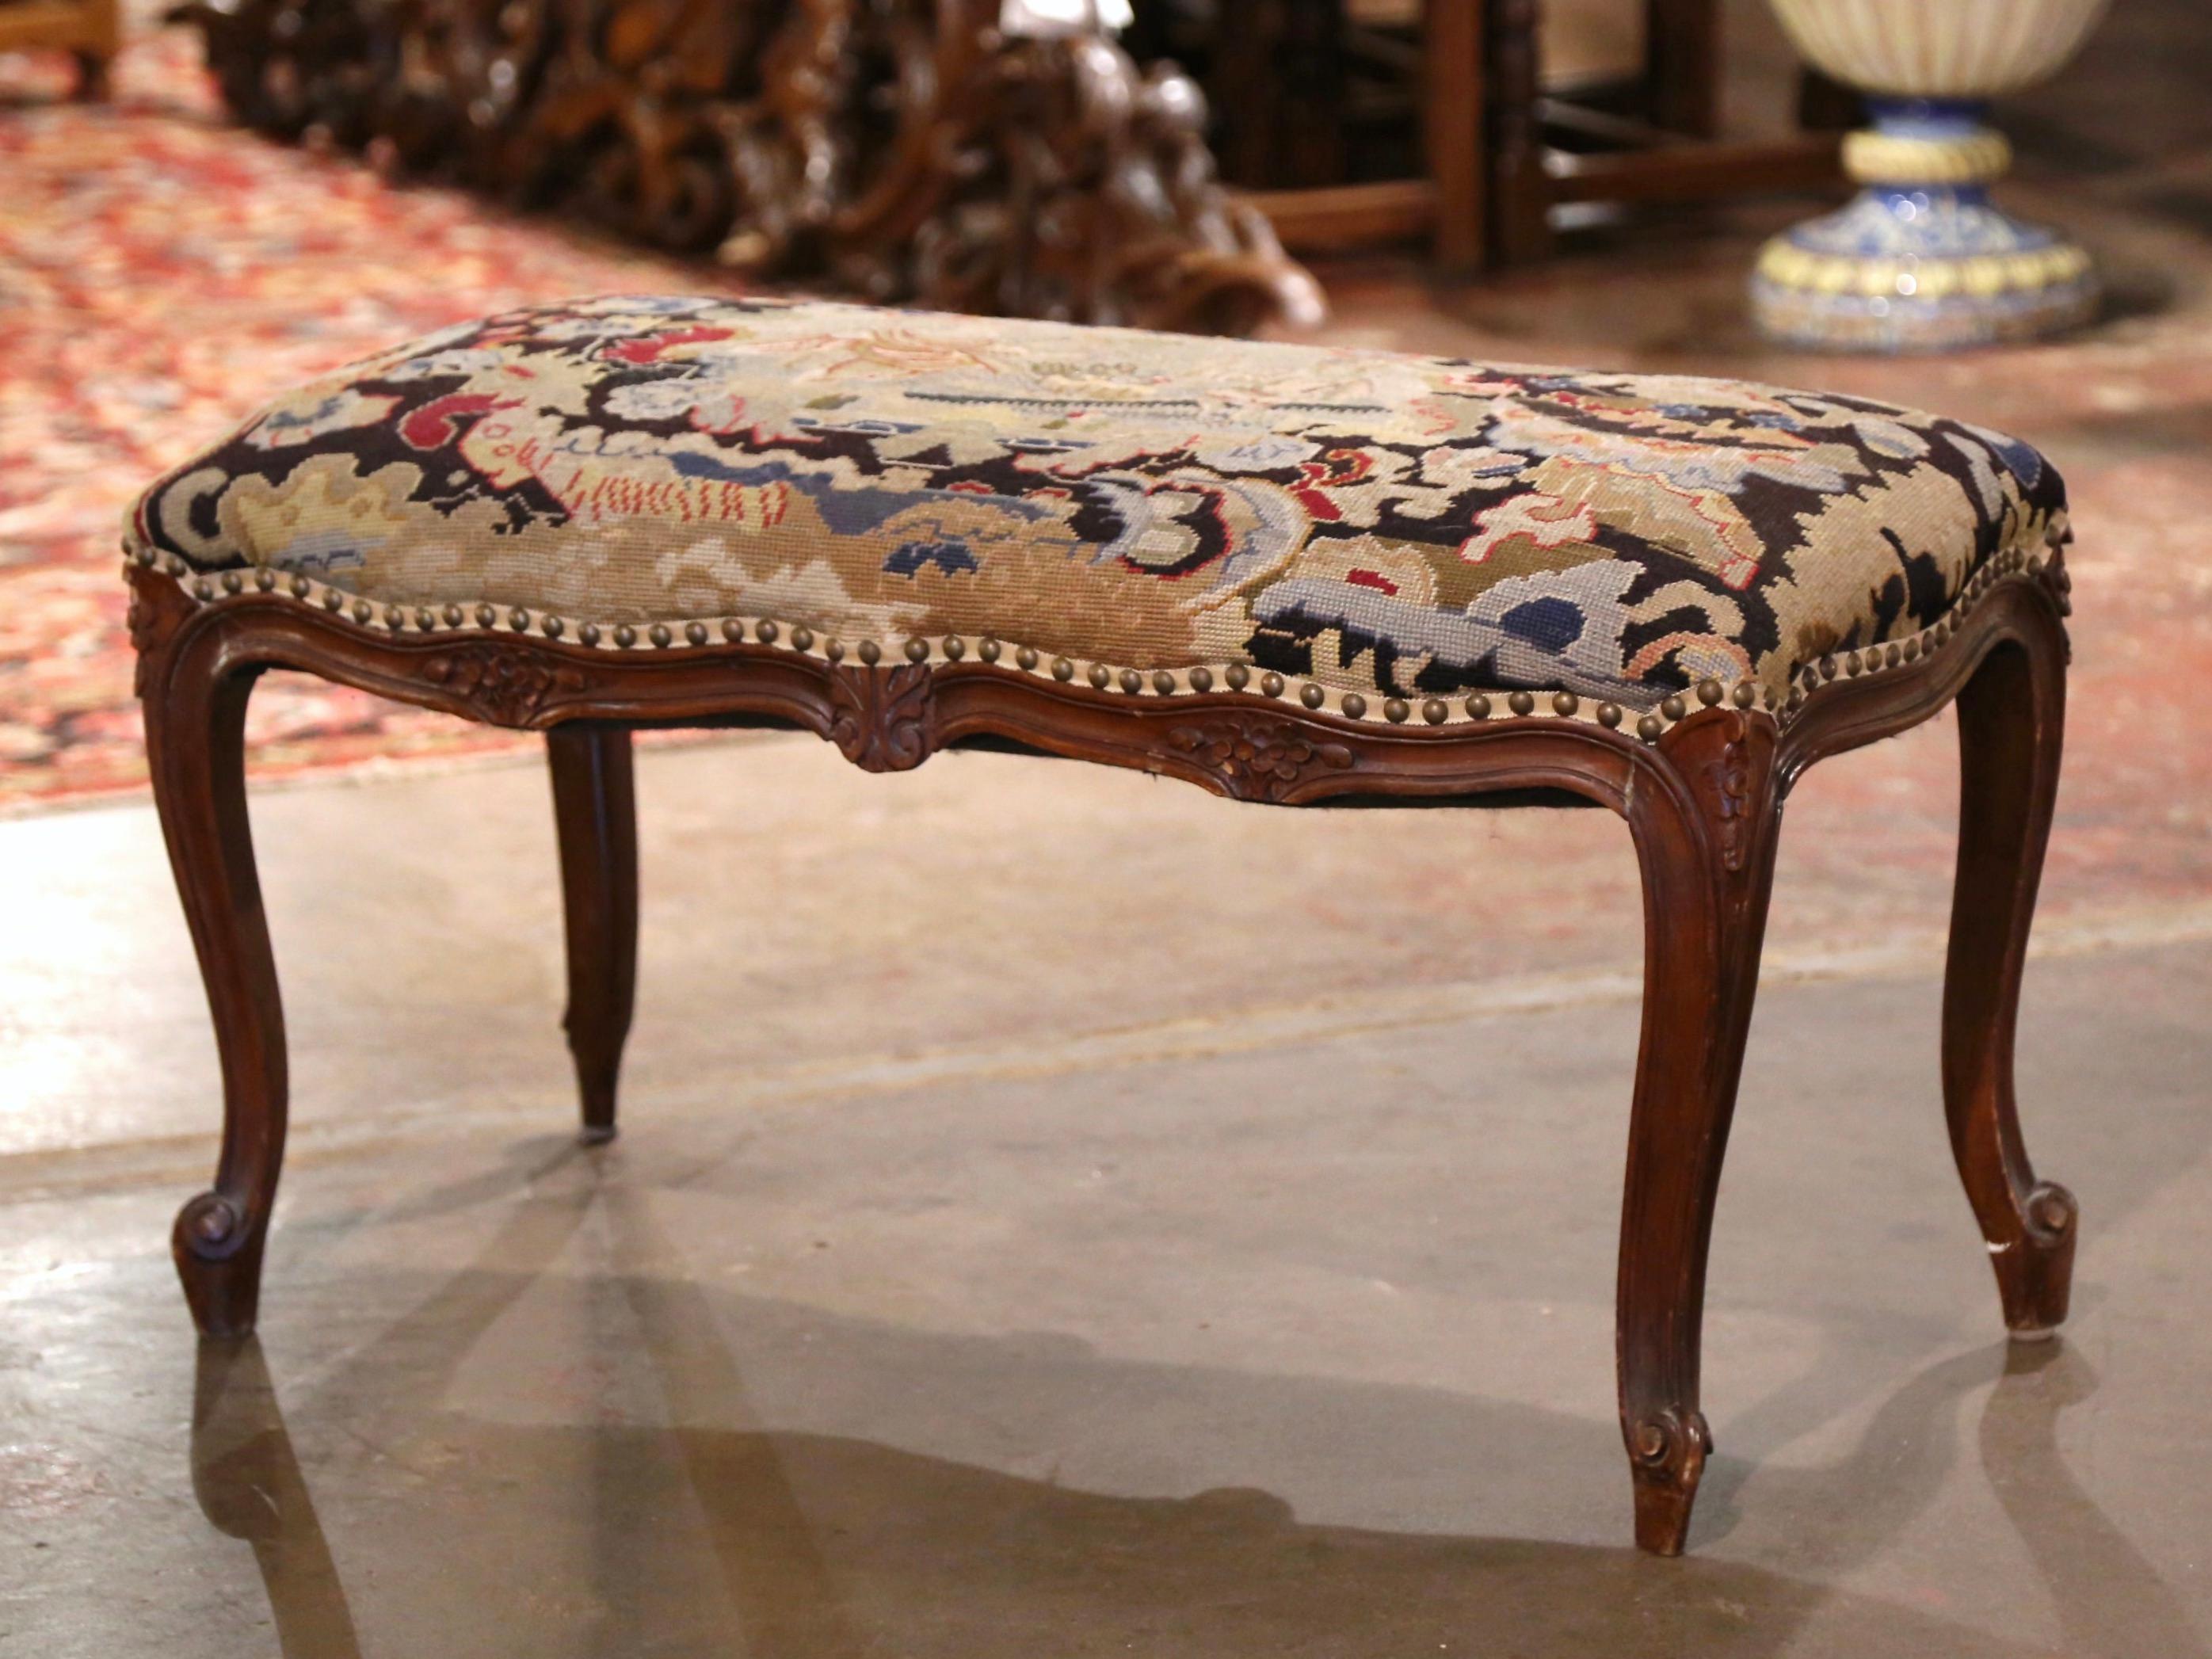 Crafted in Provence, France circa 1920, the antique fruitwood bench stands on cabriole legs decorated with acanthus leaves at the shoulders, and ending with escargot feet. The scalloped and bombe apron on the stool is decorated with a carved shell